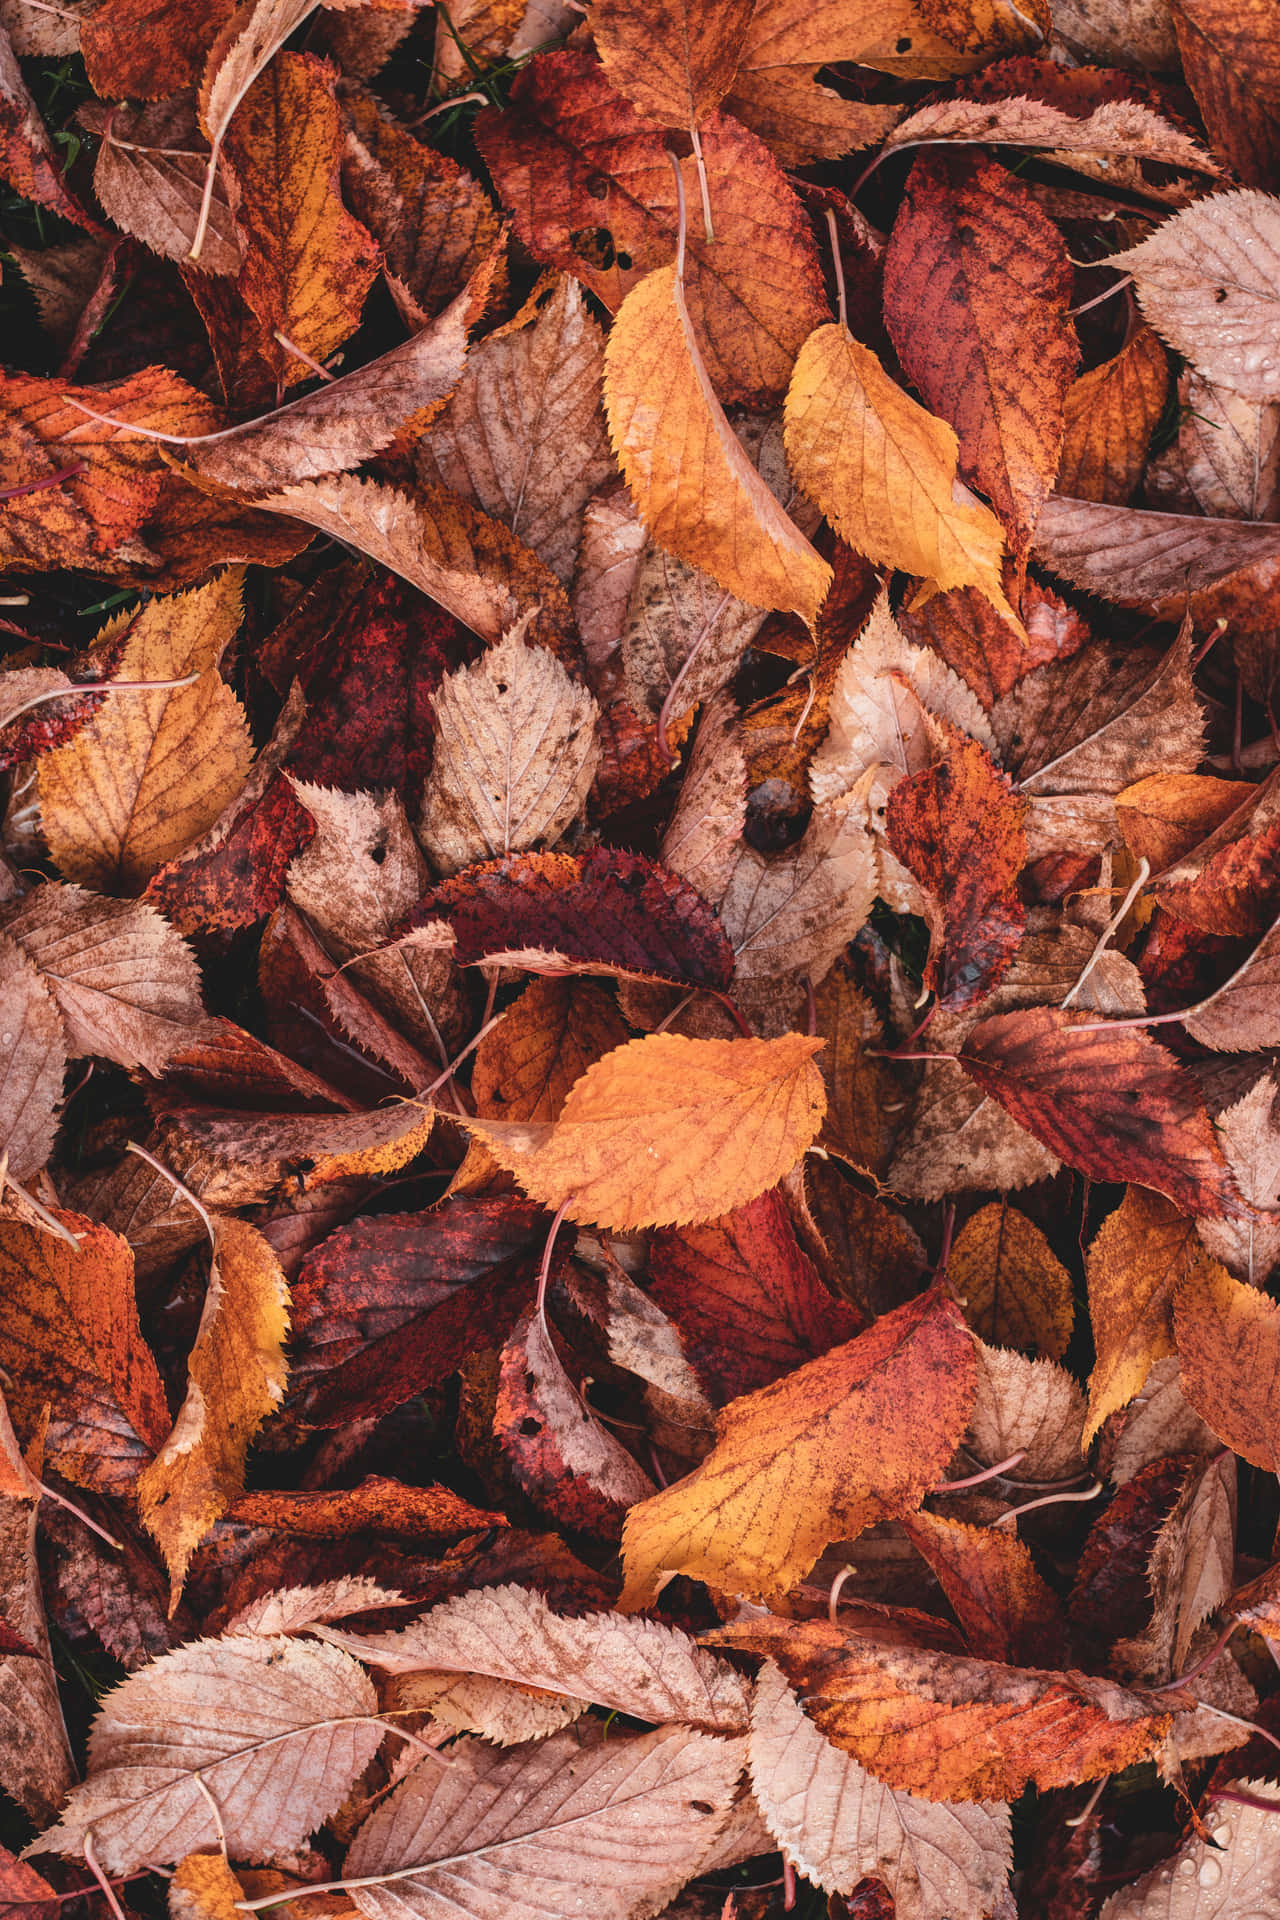 A beautiful array of red and yellow leaves - signs of Autumn Wallpaper